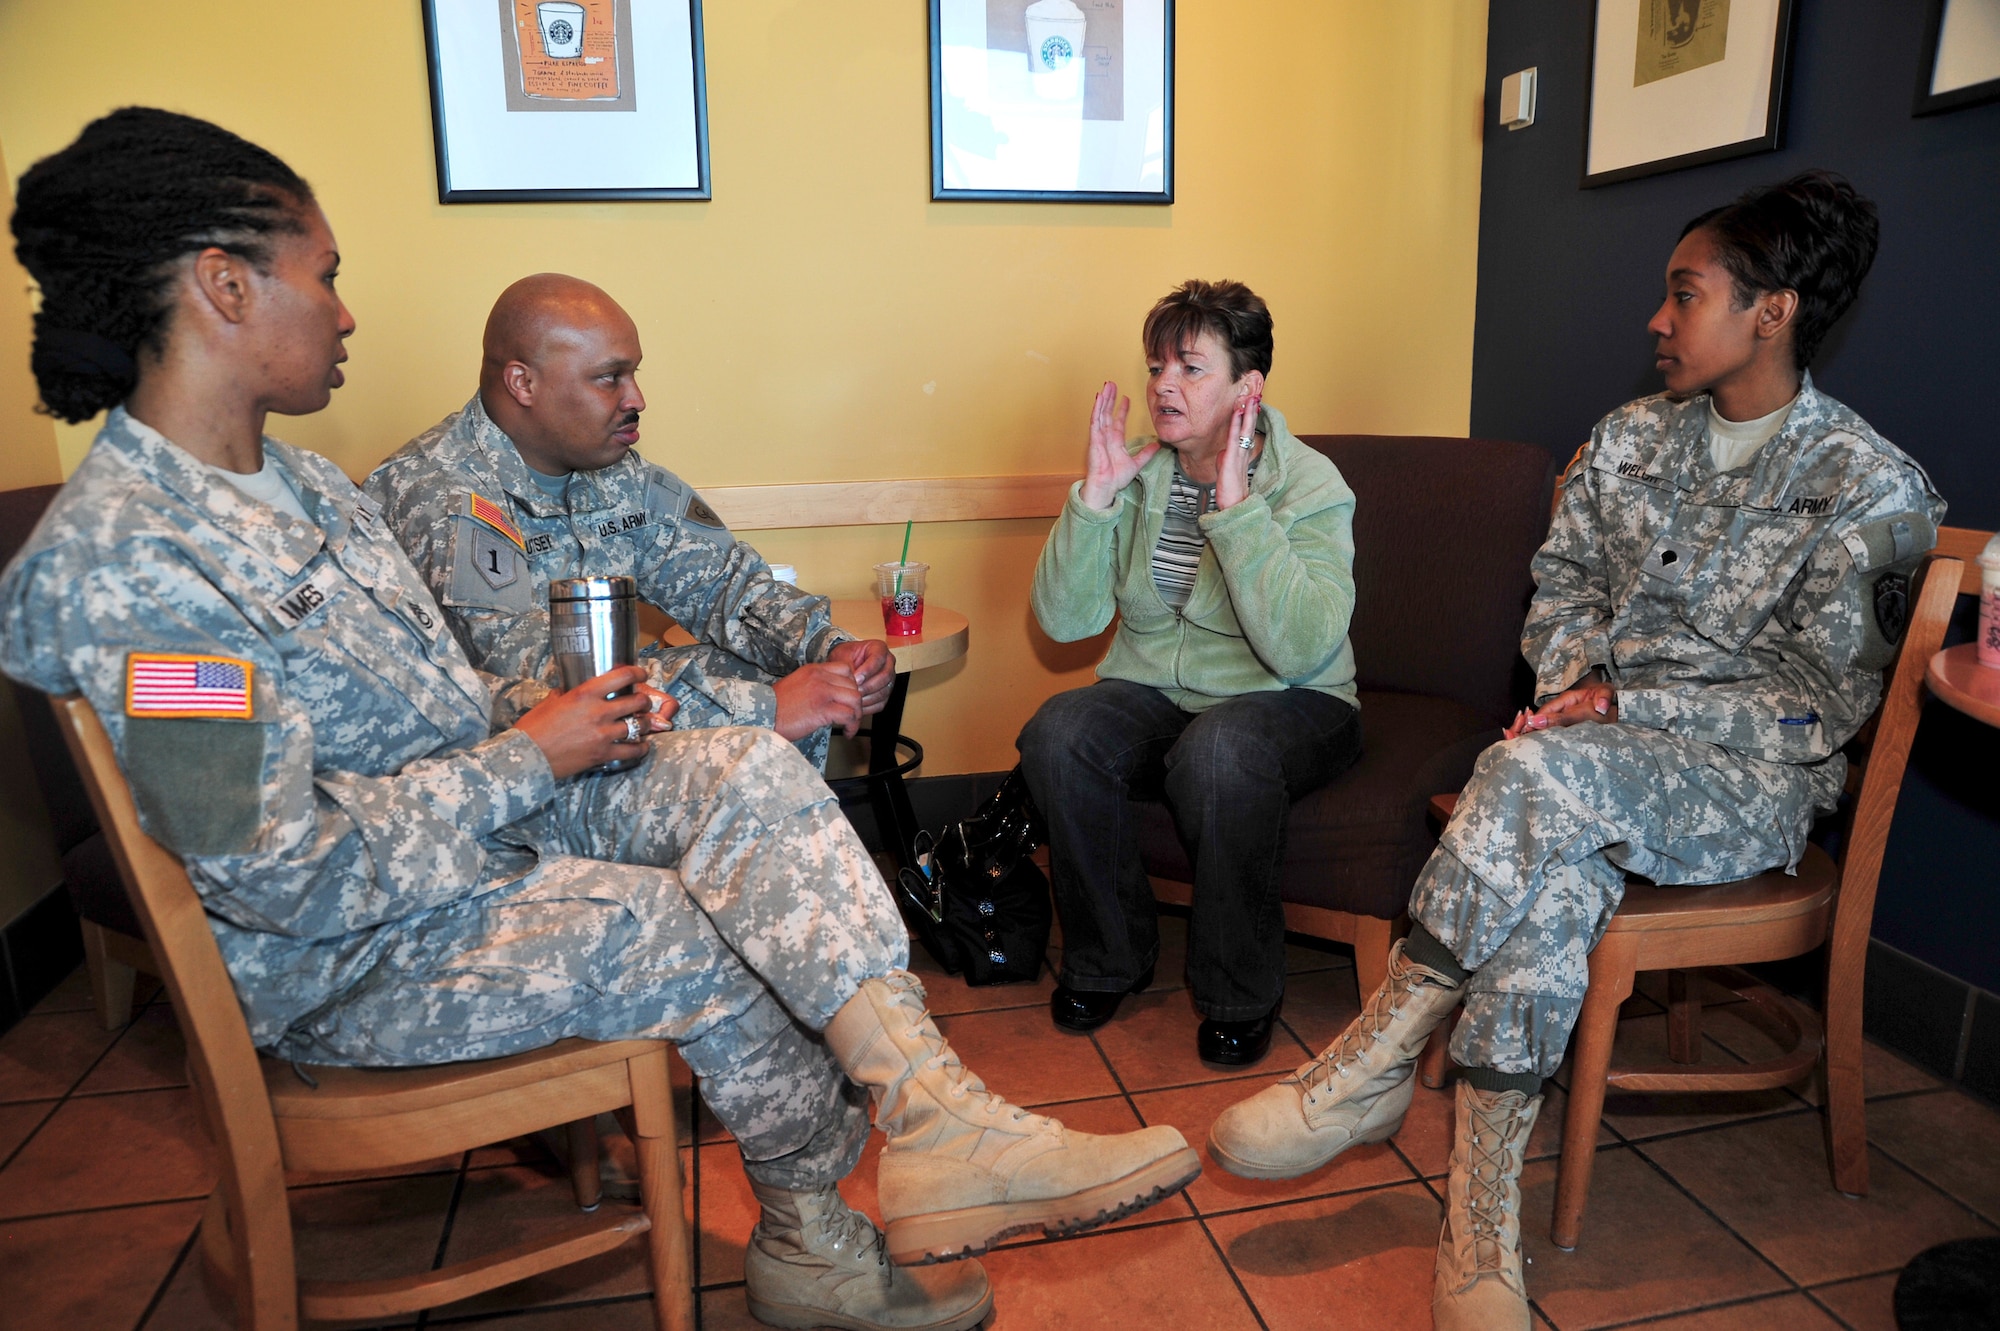 Sgt. 1st Class Pam Ames (in braids), Sgt. John Utsey and Spc. Jessica Welch, Soldiers representing the Colorado Army National Guard, speak with Cindy Barnhill at a Starbucks Coffee store in Centennial Colo., Dec. 29, 2008. In a personal mission spanning two and a half years, Barnhill, of Parker, Colo., has singlehandedly purchased more than $15,000 worth of coffee for service members and first responders in the two communities south of Denver. (Official U.S. Air Force photo by Tech. Sgt. Cheresa D. Theiral, Colorado National Guard) (Released) 